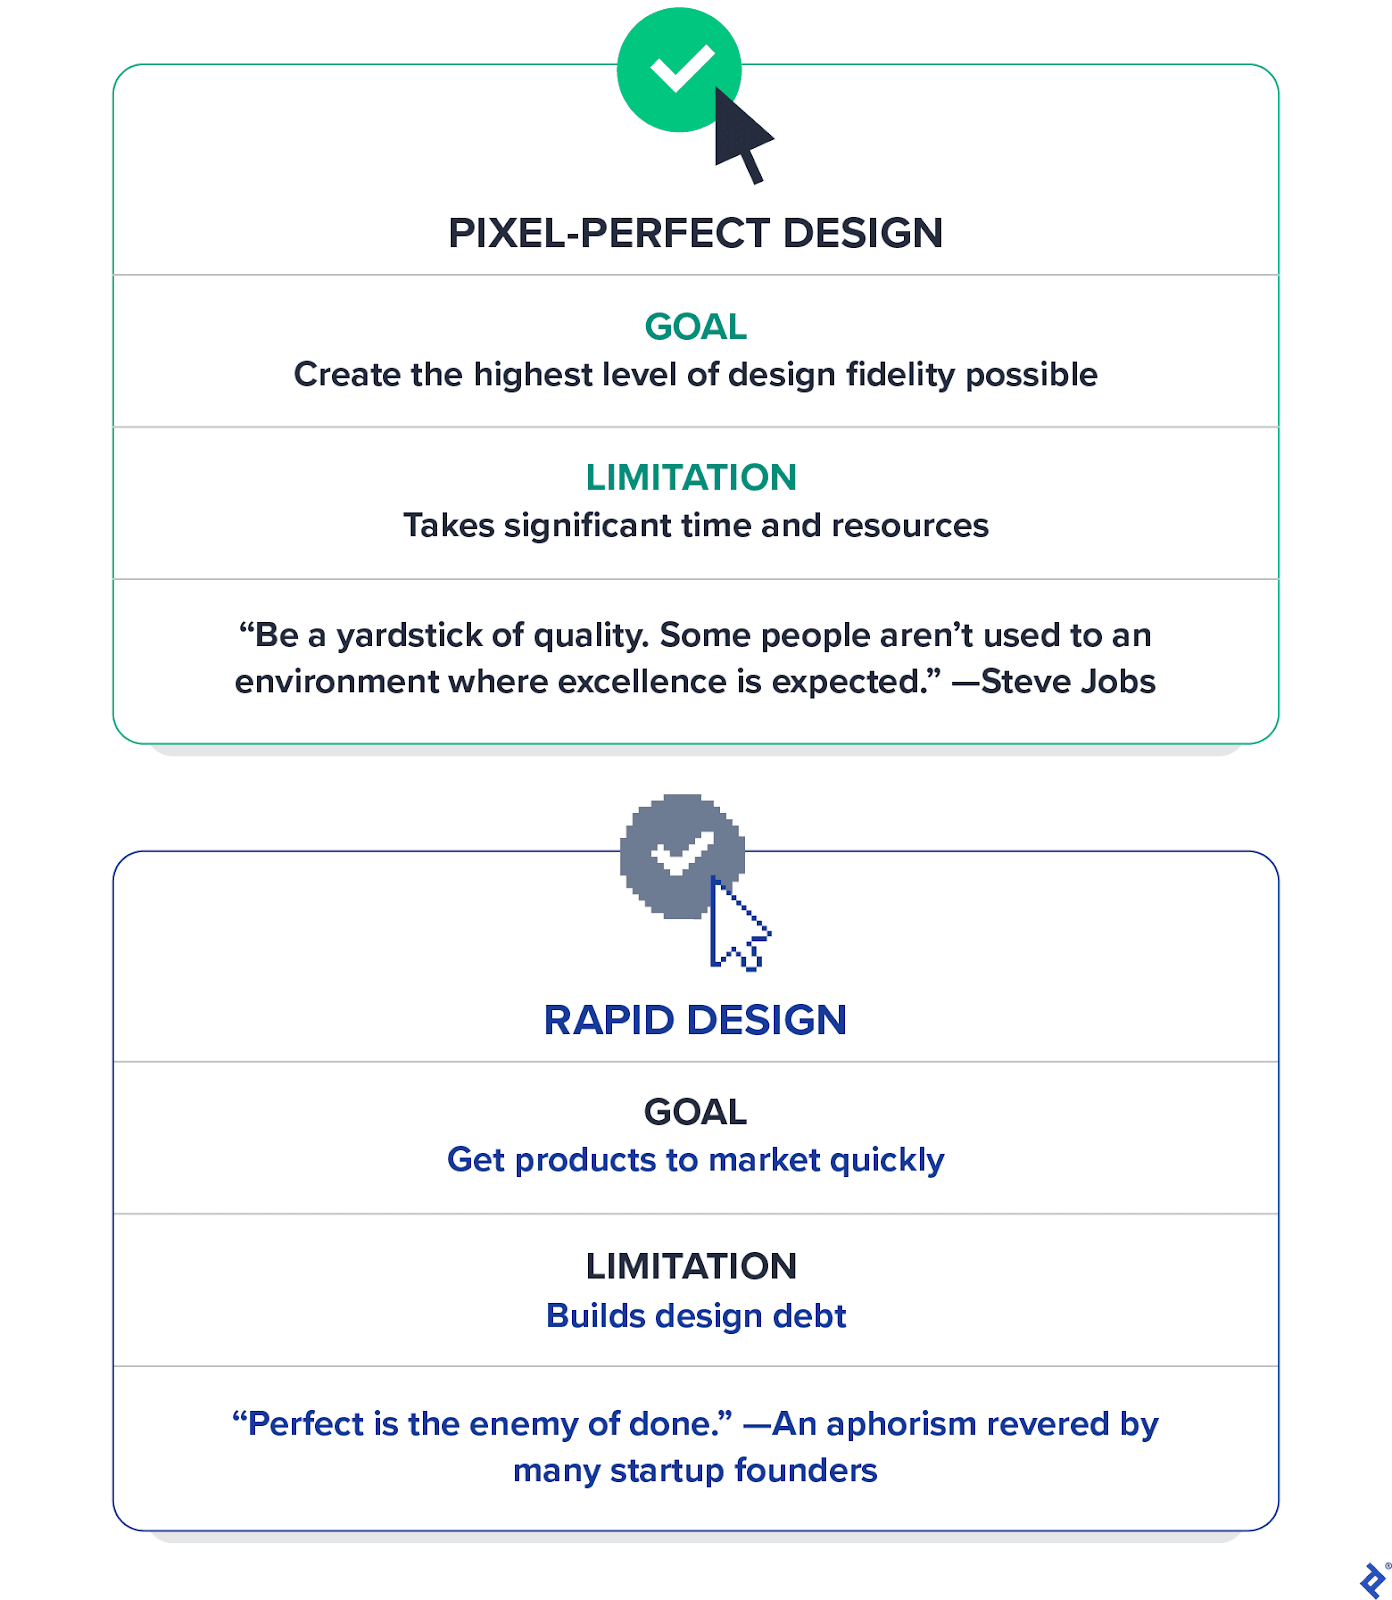 A comparison of the goals and limitations of pixel-perfect design and rapid design.